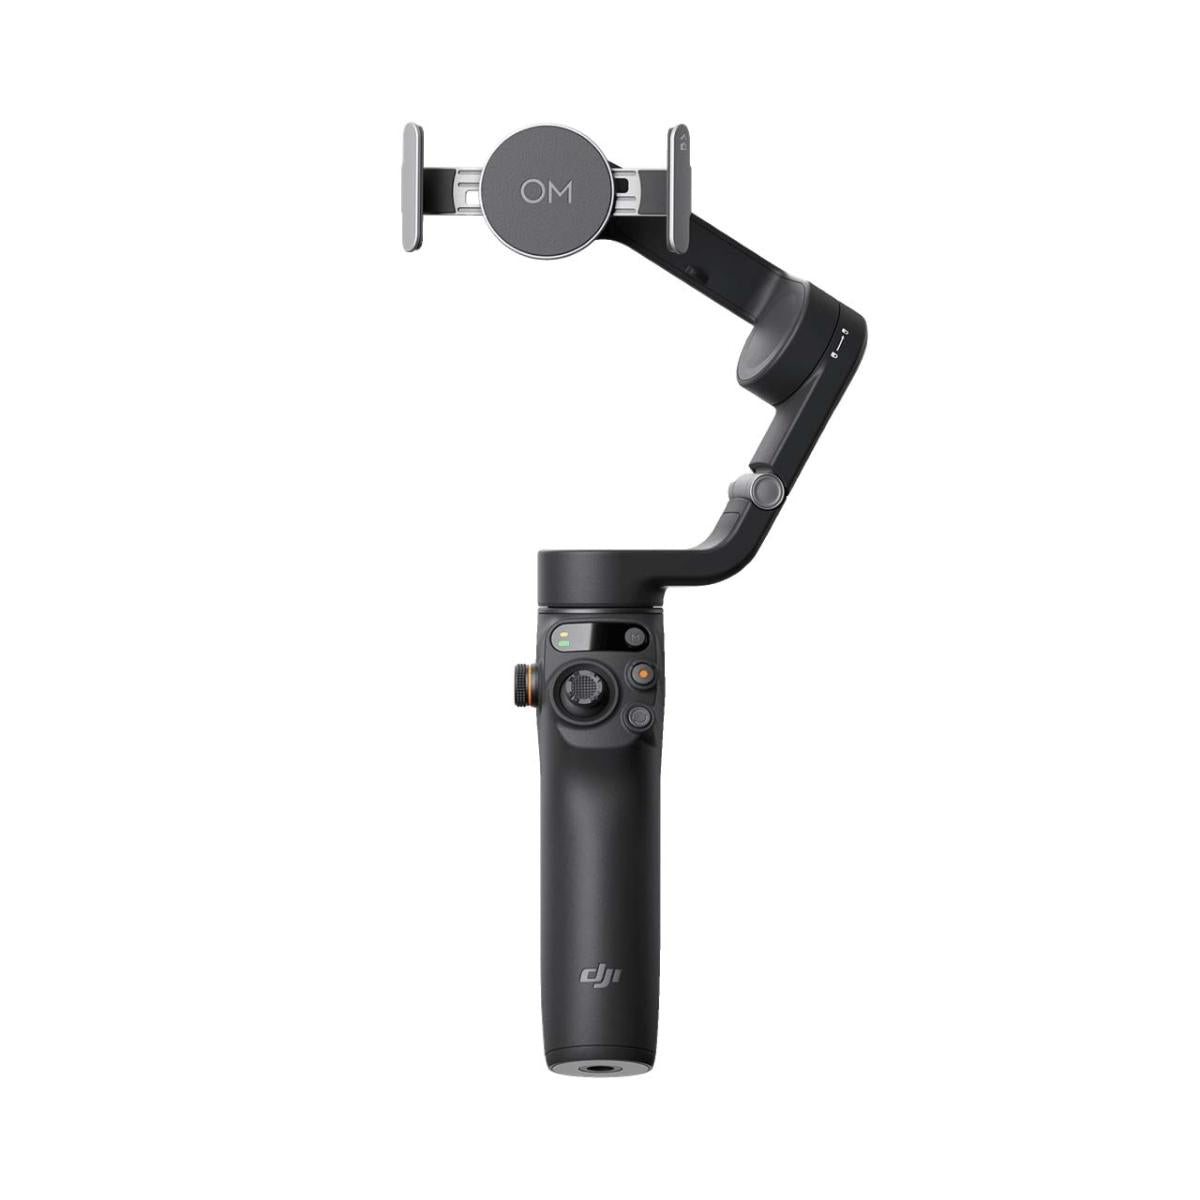 DJI Osmo Mobile 6 Gimbal 3-Axis Stabilizer for Smartphones - Black